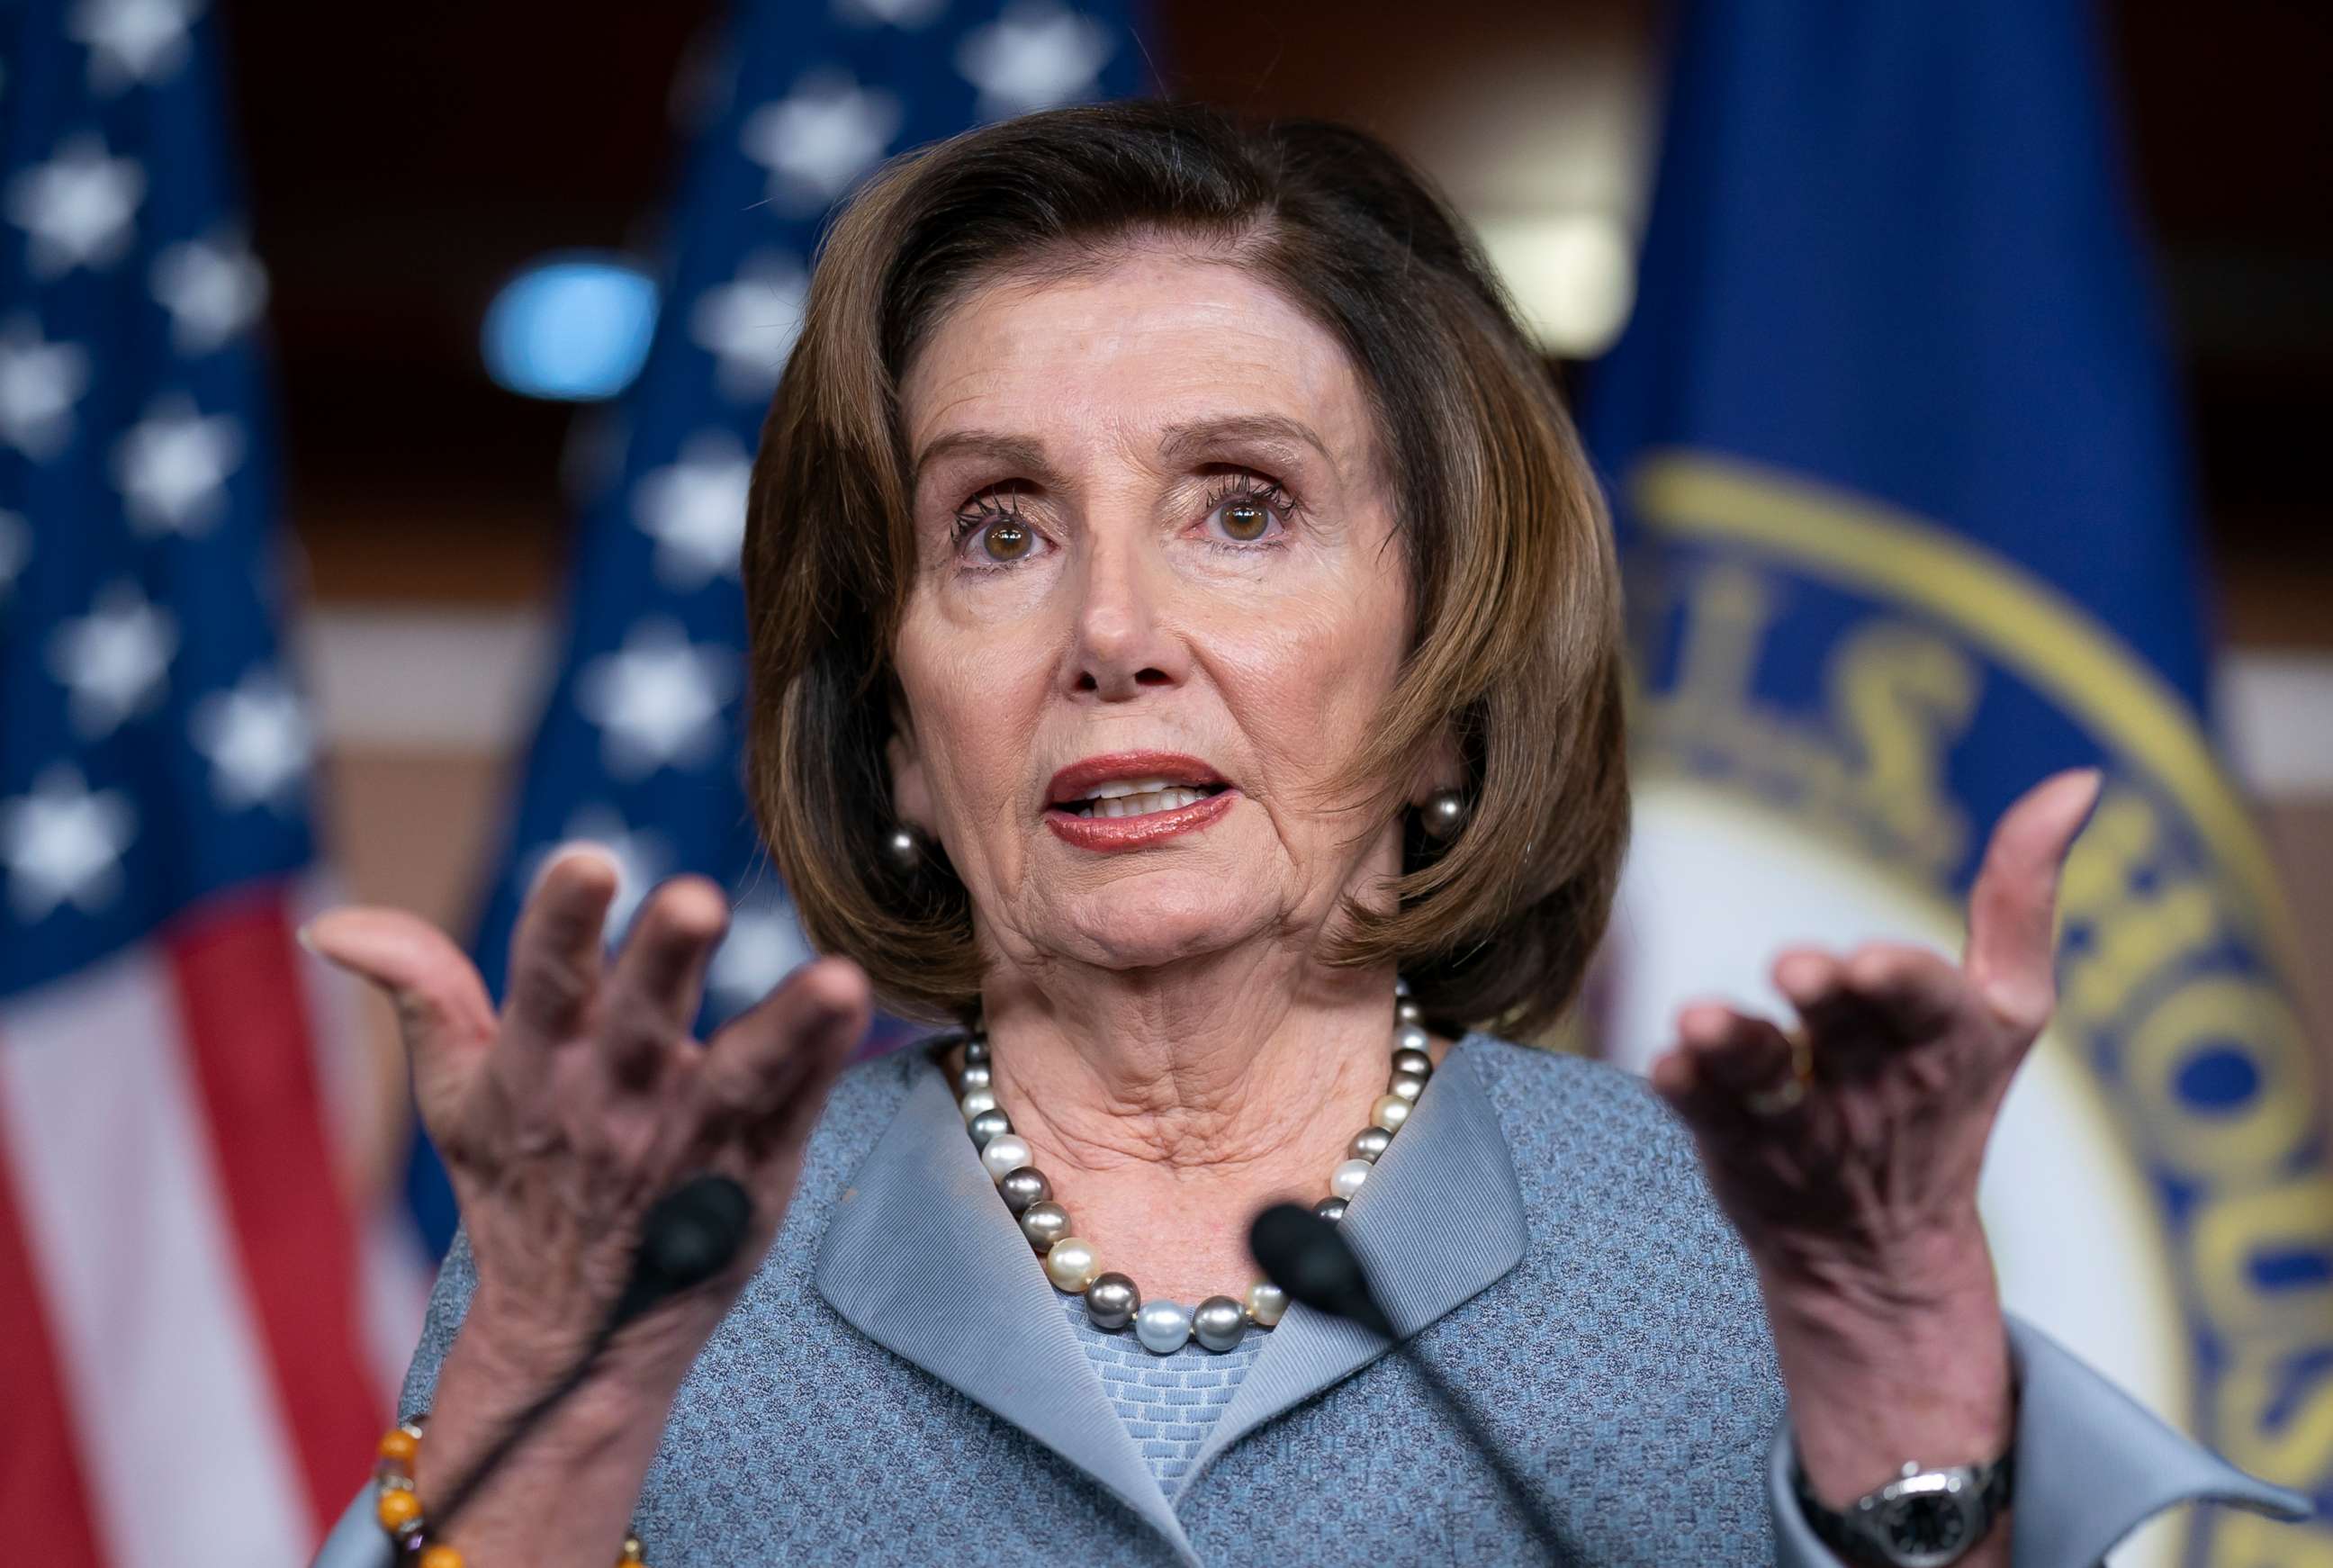 PHOTO: Speaker of the House Nancy Pelosi speaks during a news conference on Capitol Hill in Washington, Feb. 27, 2020.